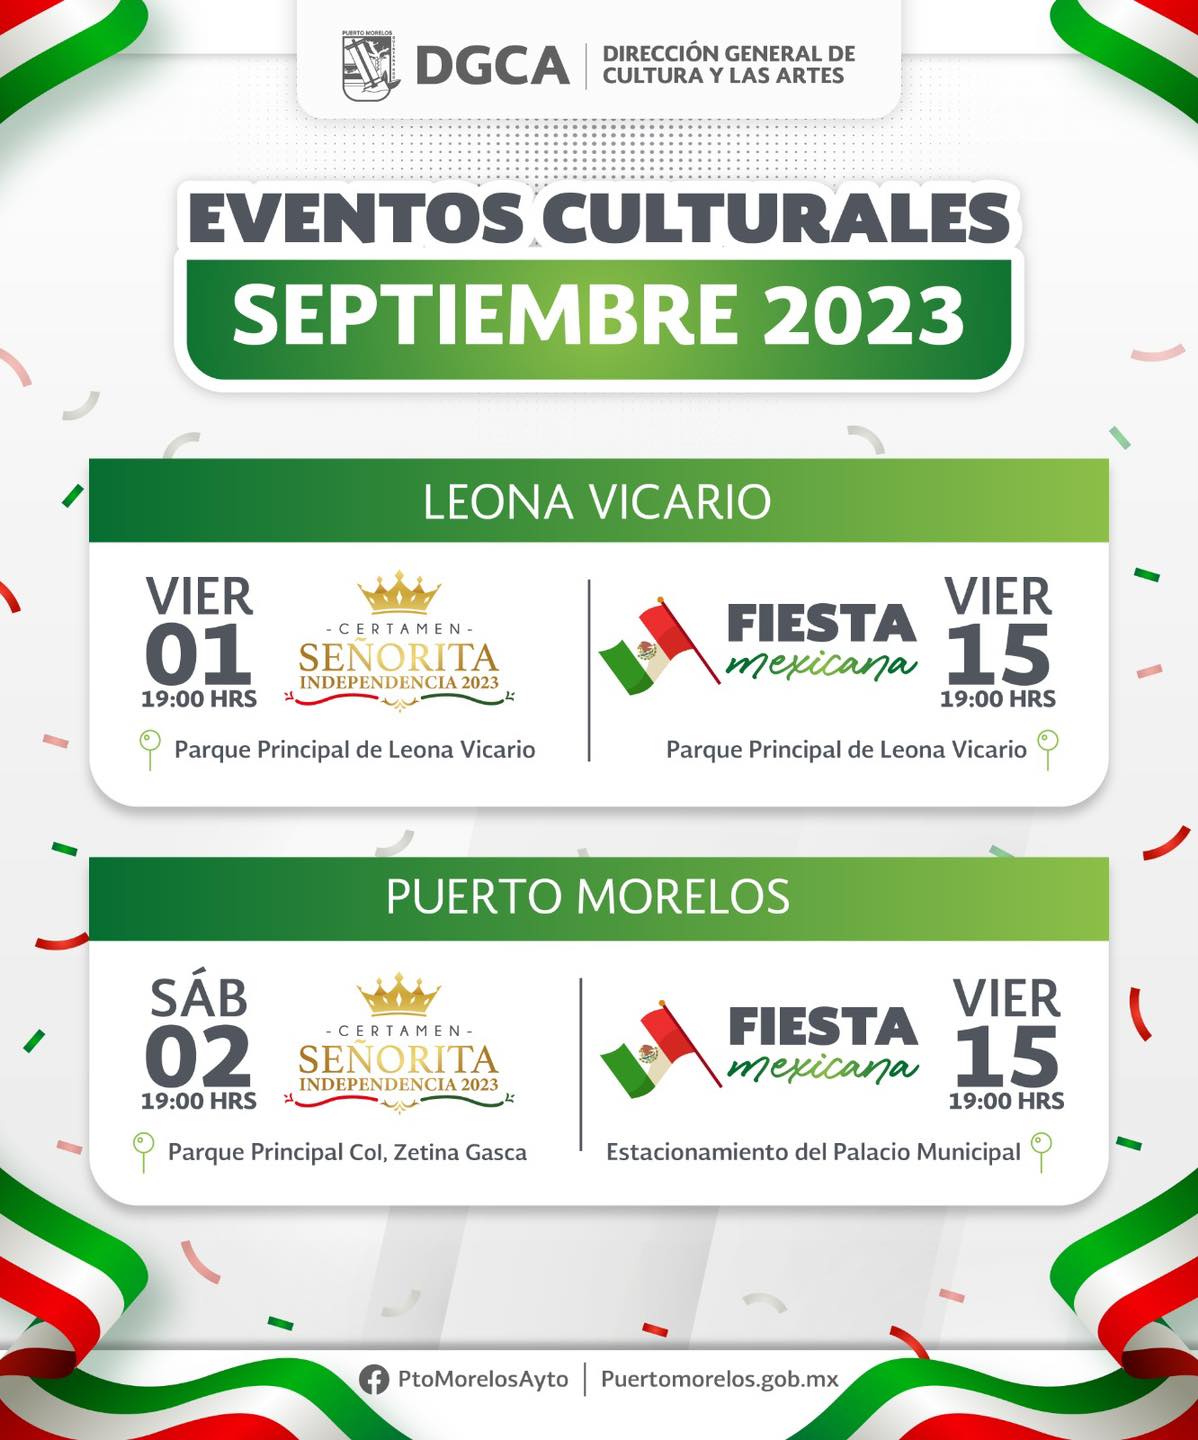 Flyer for Puerto Morelos Mexican Independence Day events in Puerto Morelos and Leona Vicario.